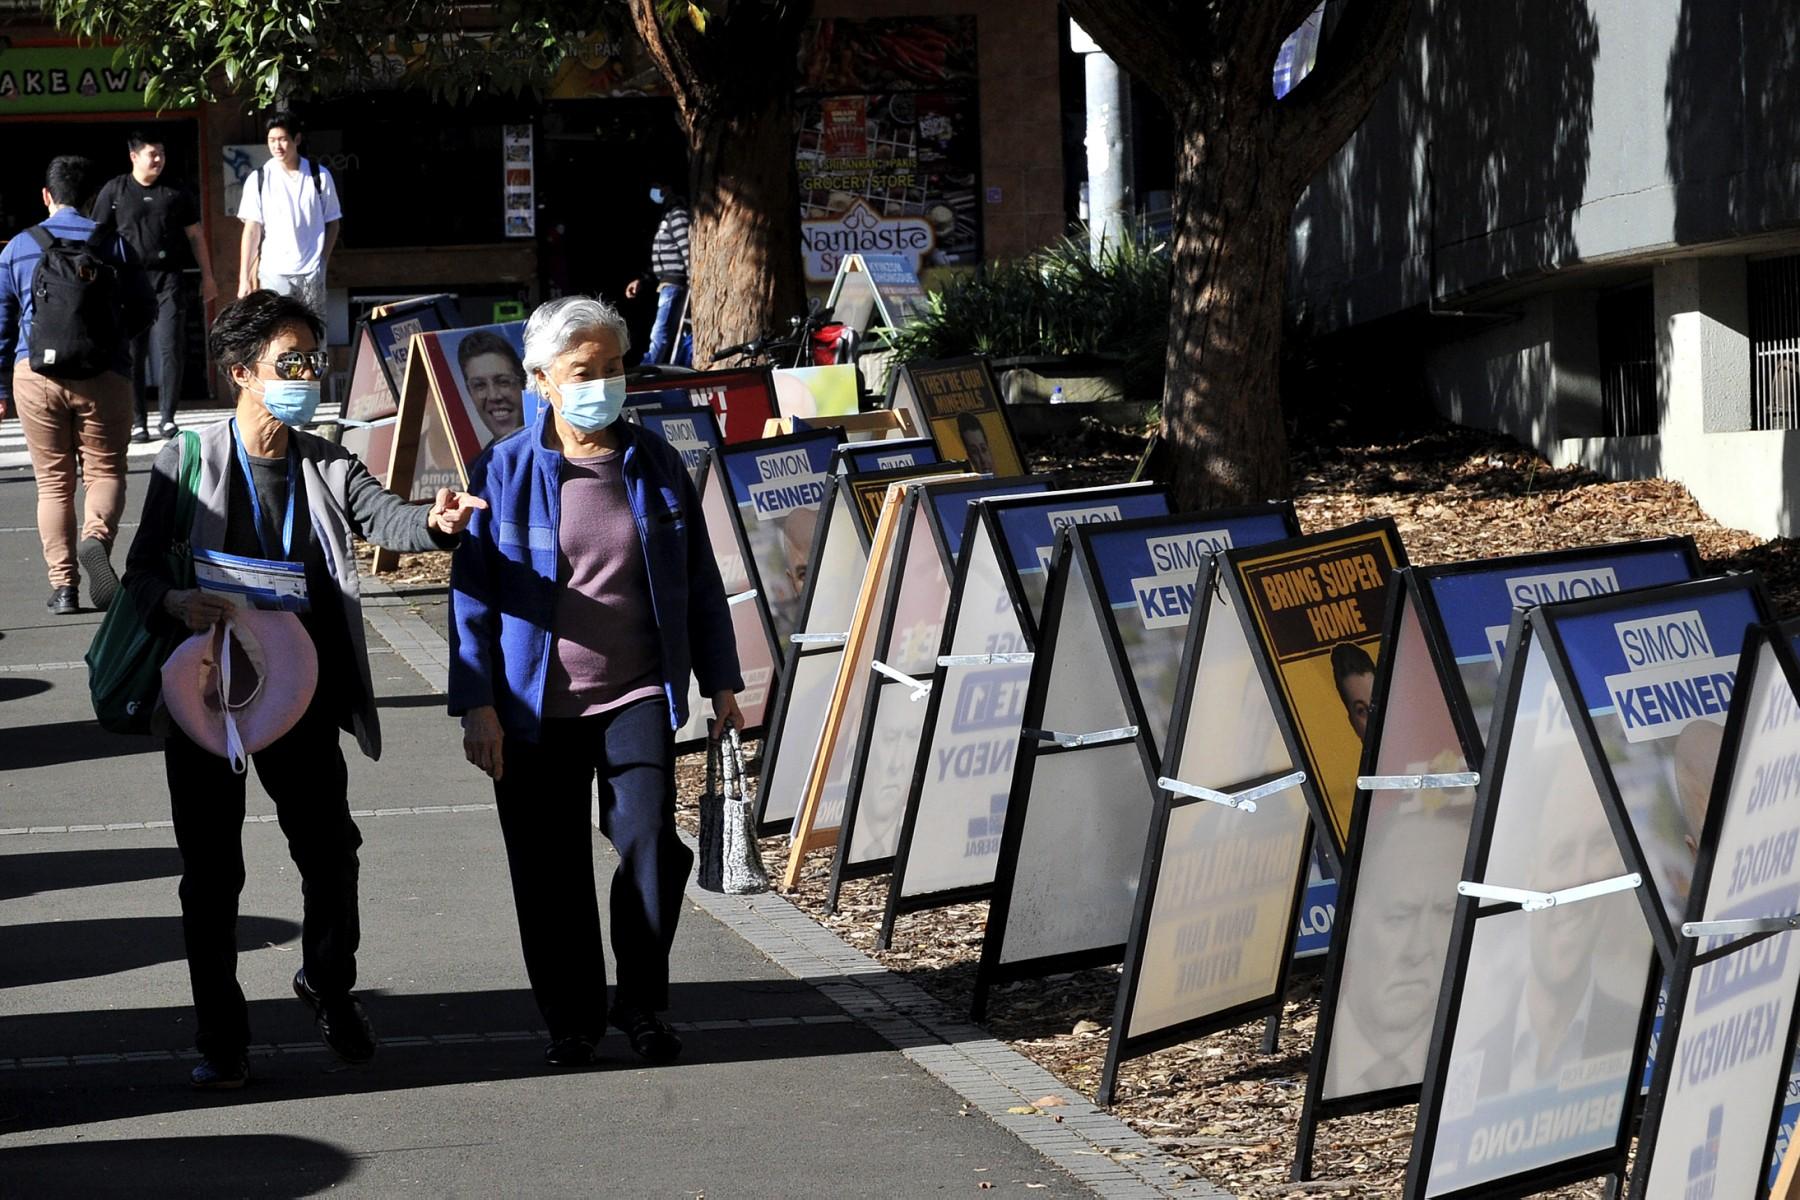 This picture taken on May 17 shows residents walking to cast their votes at a pre-polling station in Epping suburb of Sydney, as Australians go to the polls on May 21 to decide who will run the country for the next three years. Photo: AFP